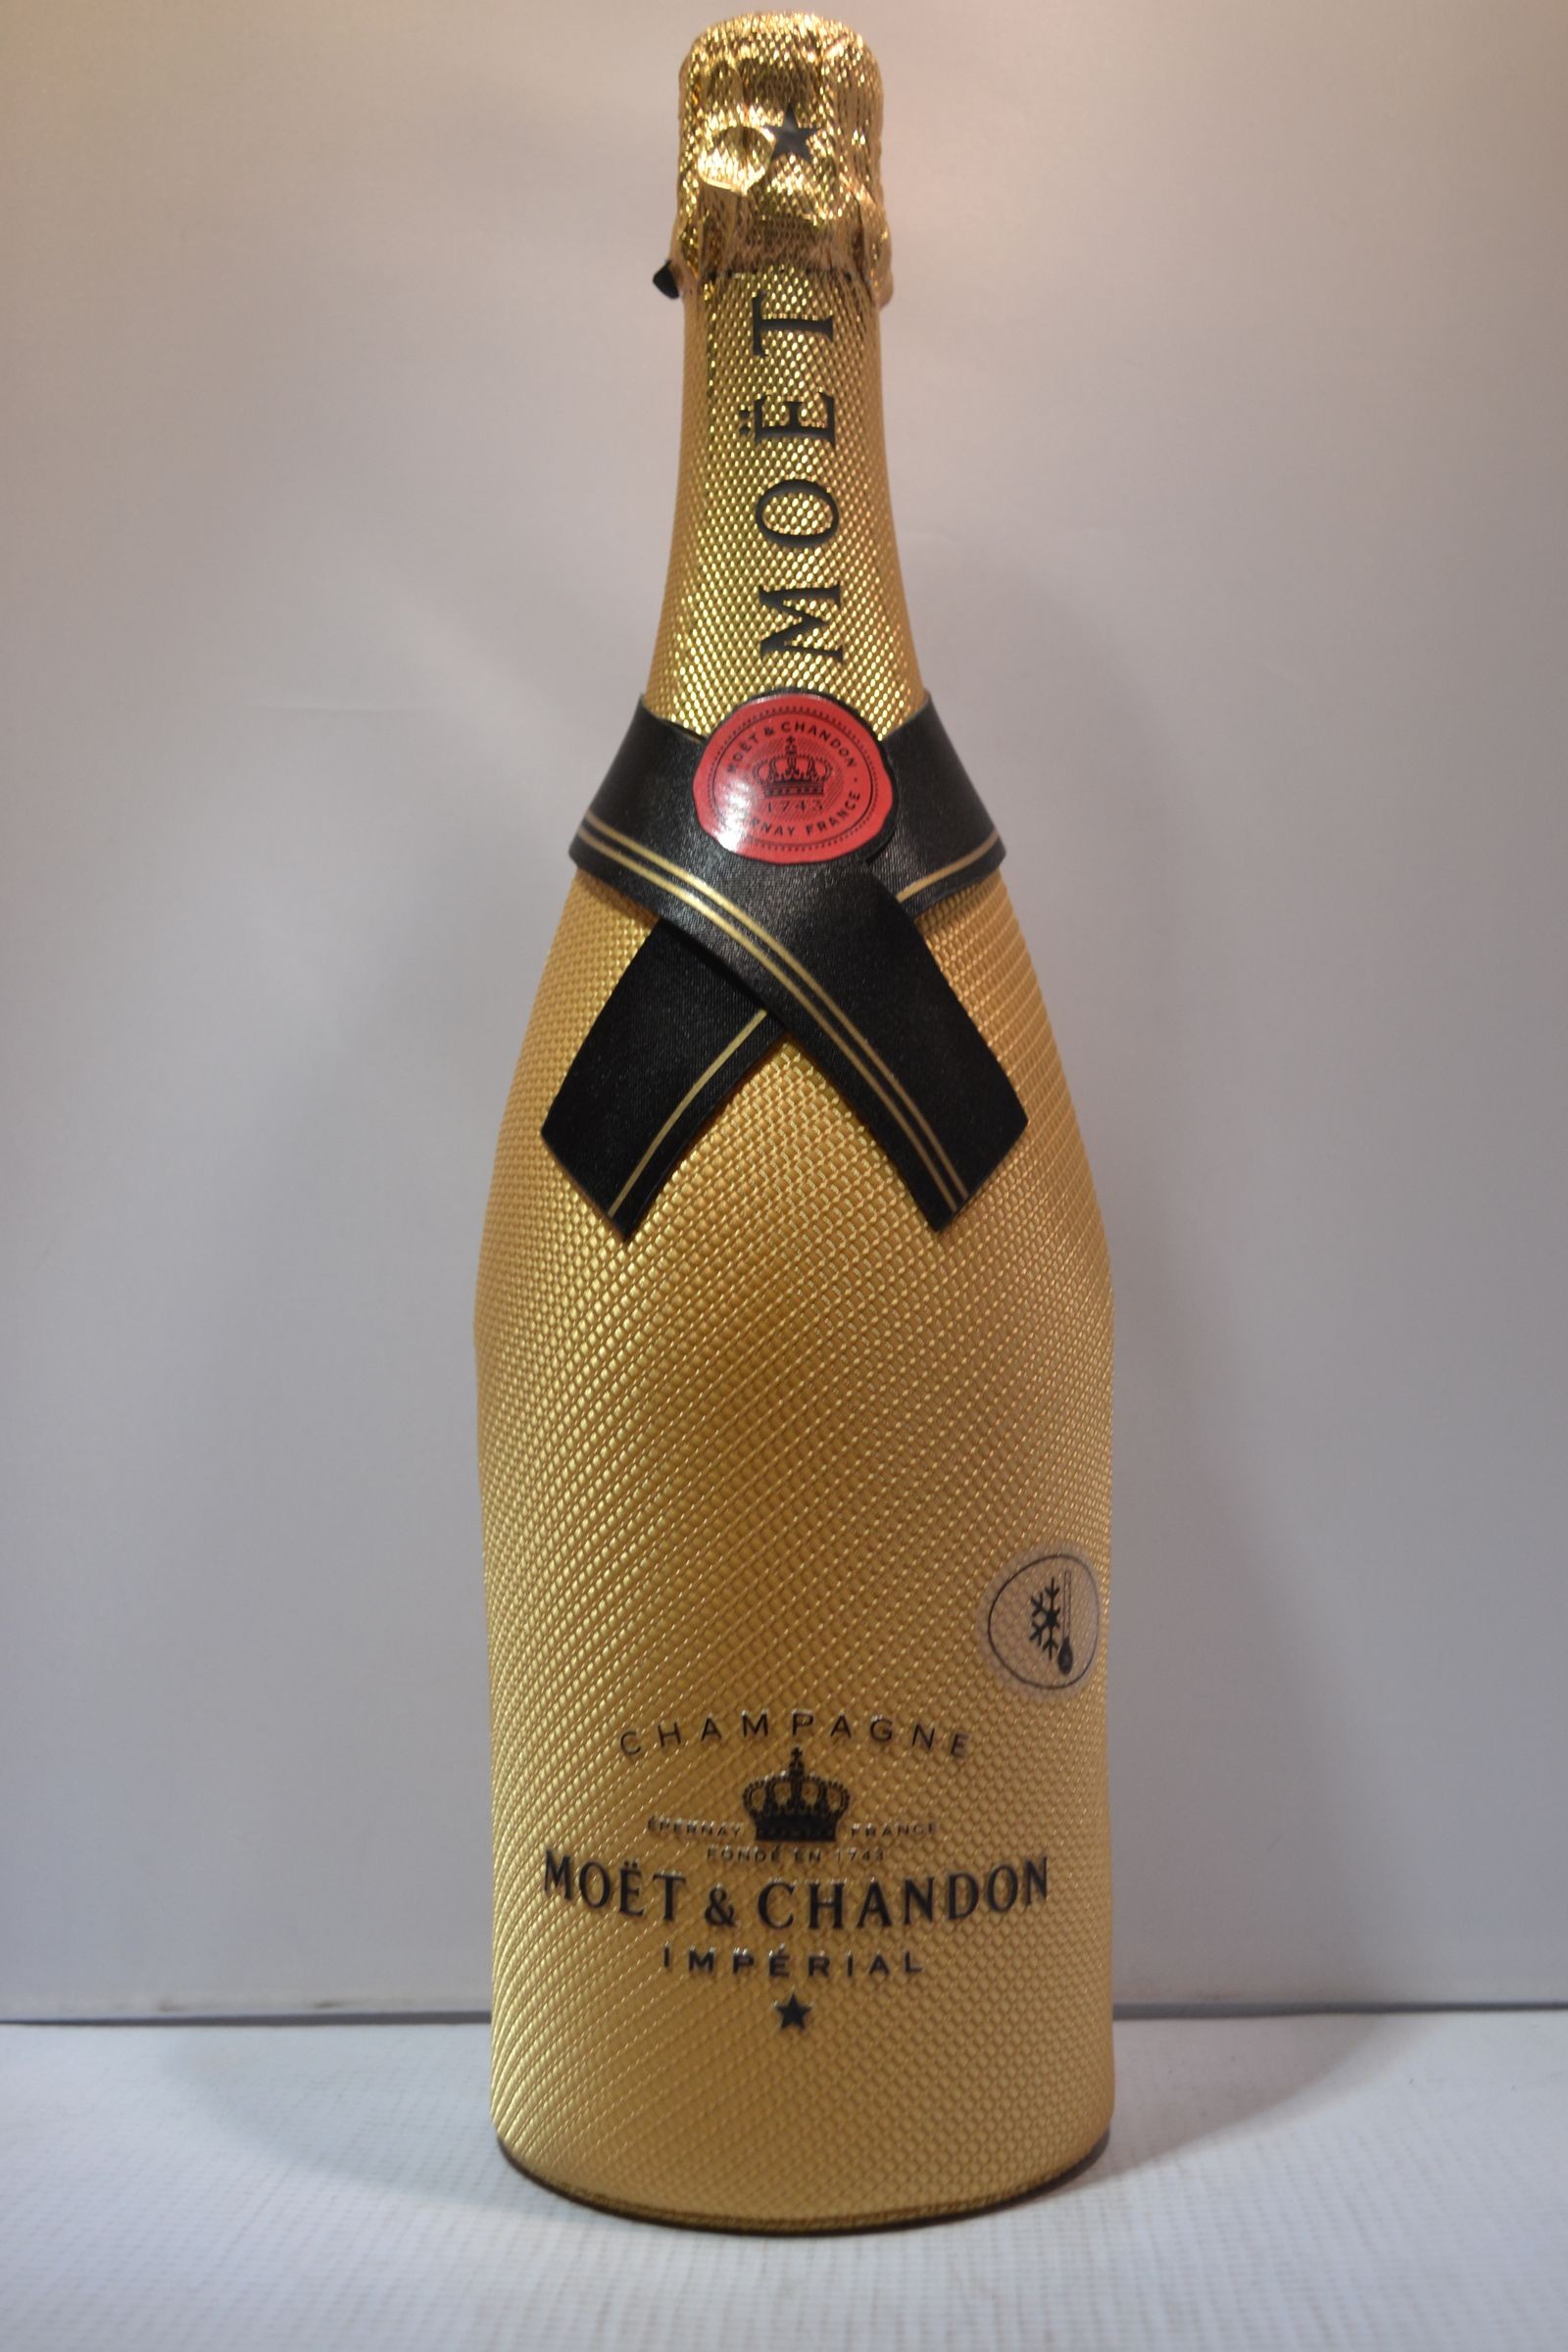 Gooi Gewoon syndroom Buy MOET & CHANDON CHAMPAGNE BRUT IMPERIAL W/DIA SUIT GOLD 750ML